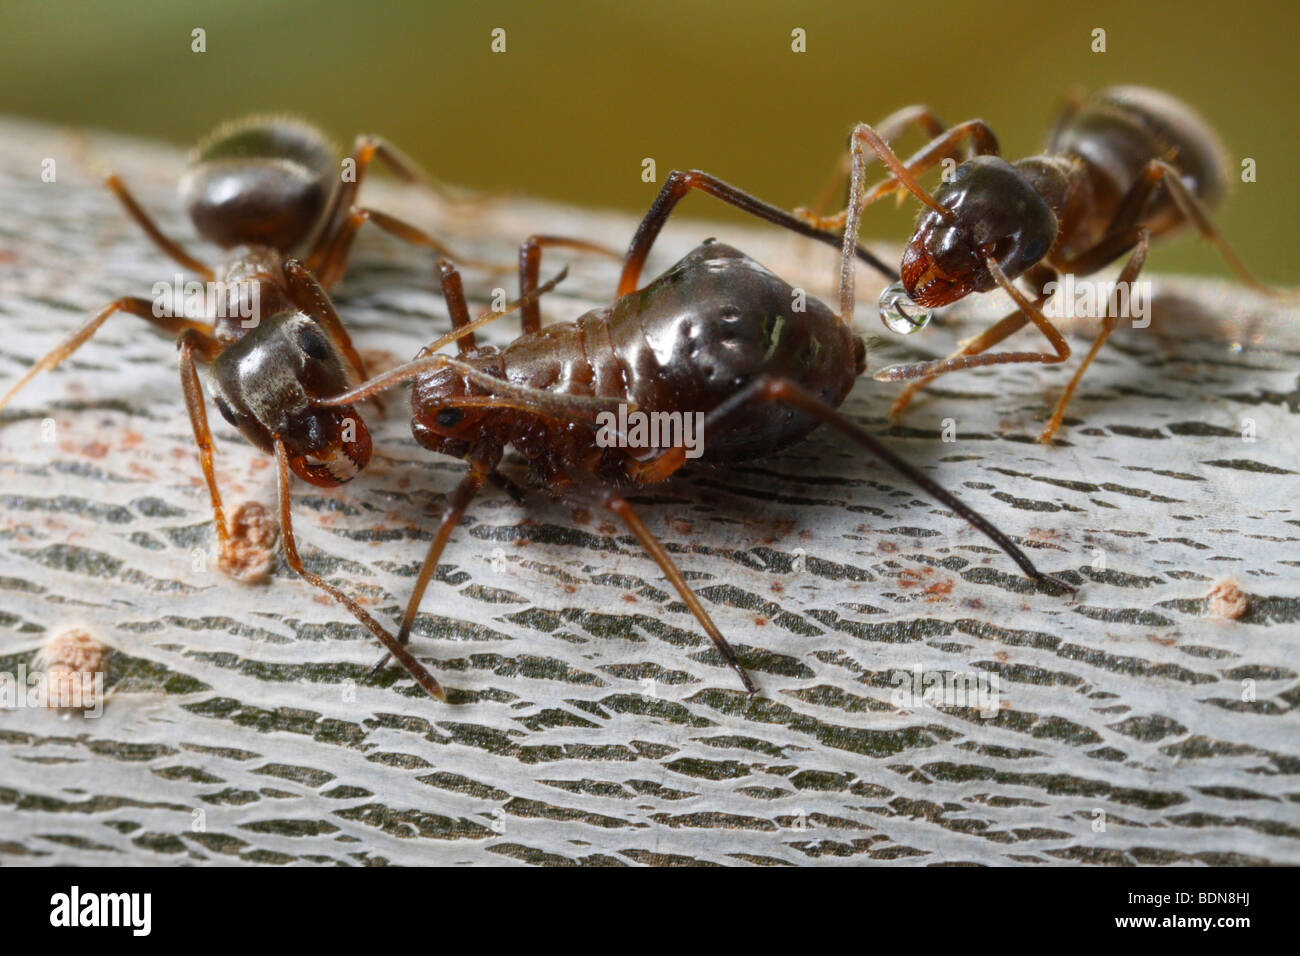 Two black garden ants (Lasius niger) milking an aphid (probably Lachnus spec.) on an oak twig. Stock Photo